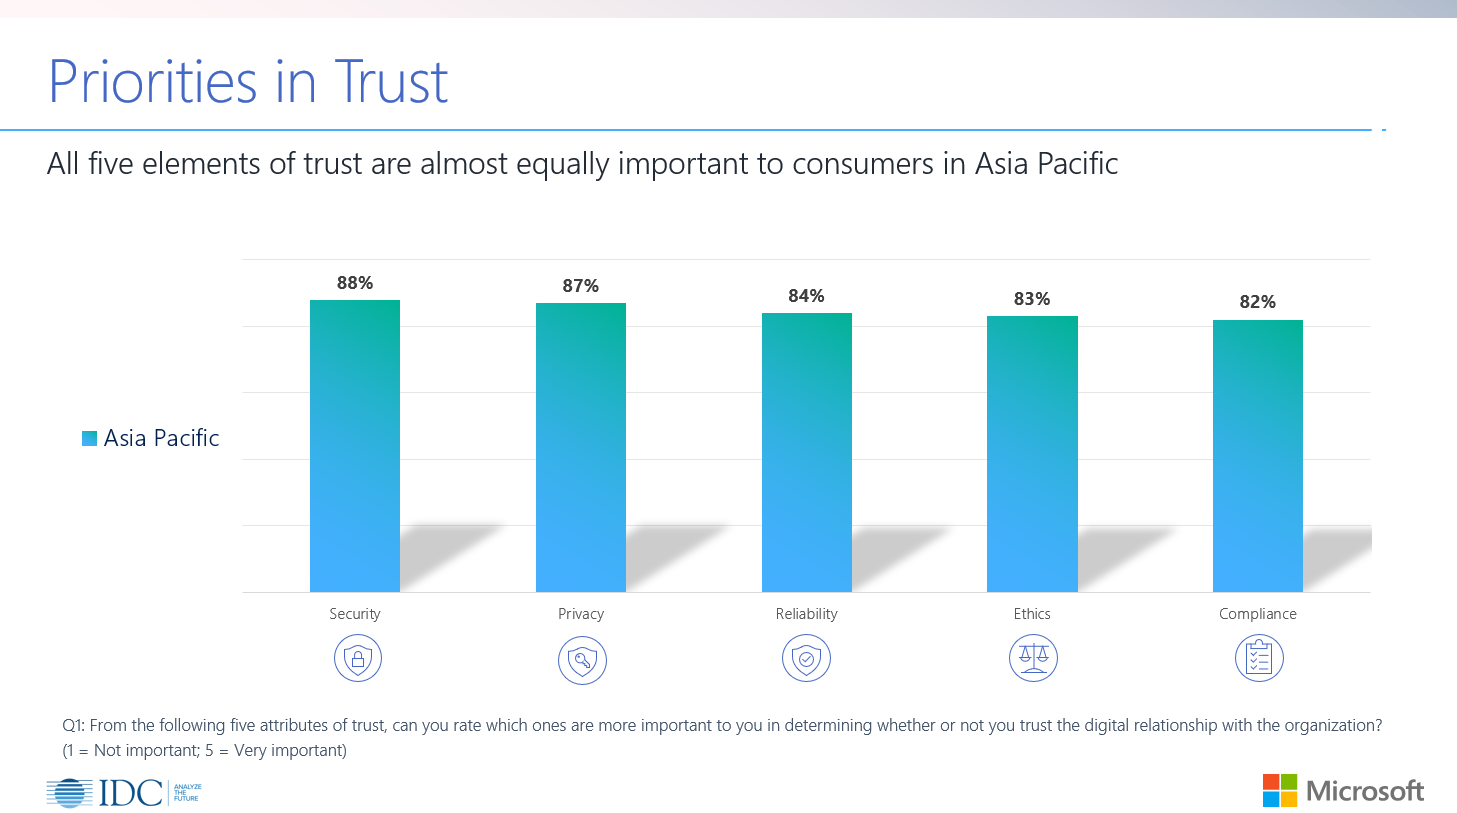 Fig 1: The importance of the five trust elements, according to consumers in Asia Pacific